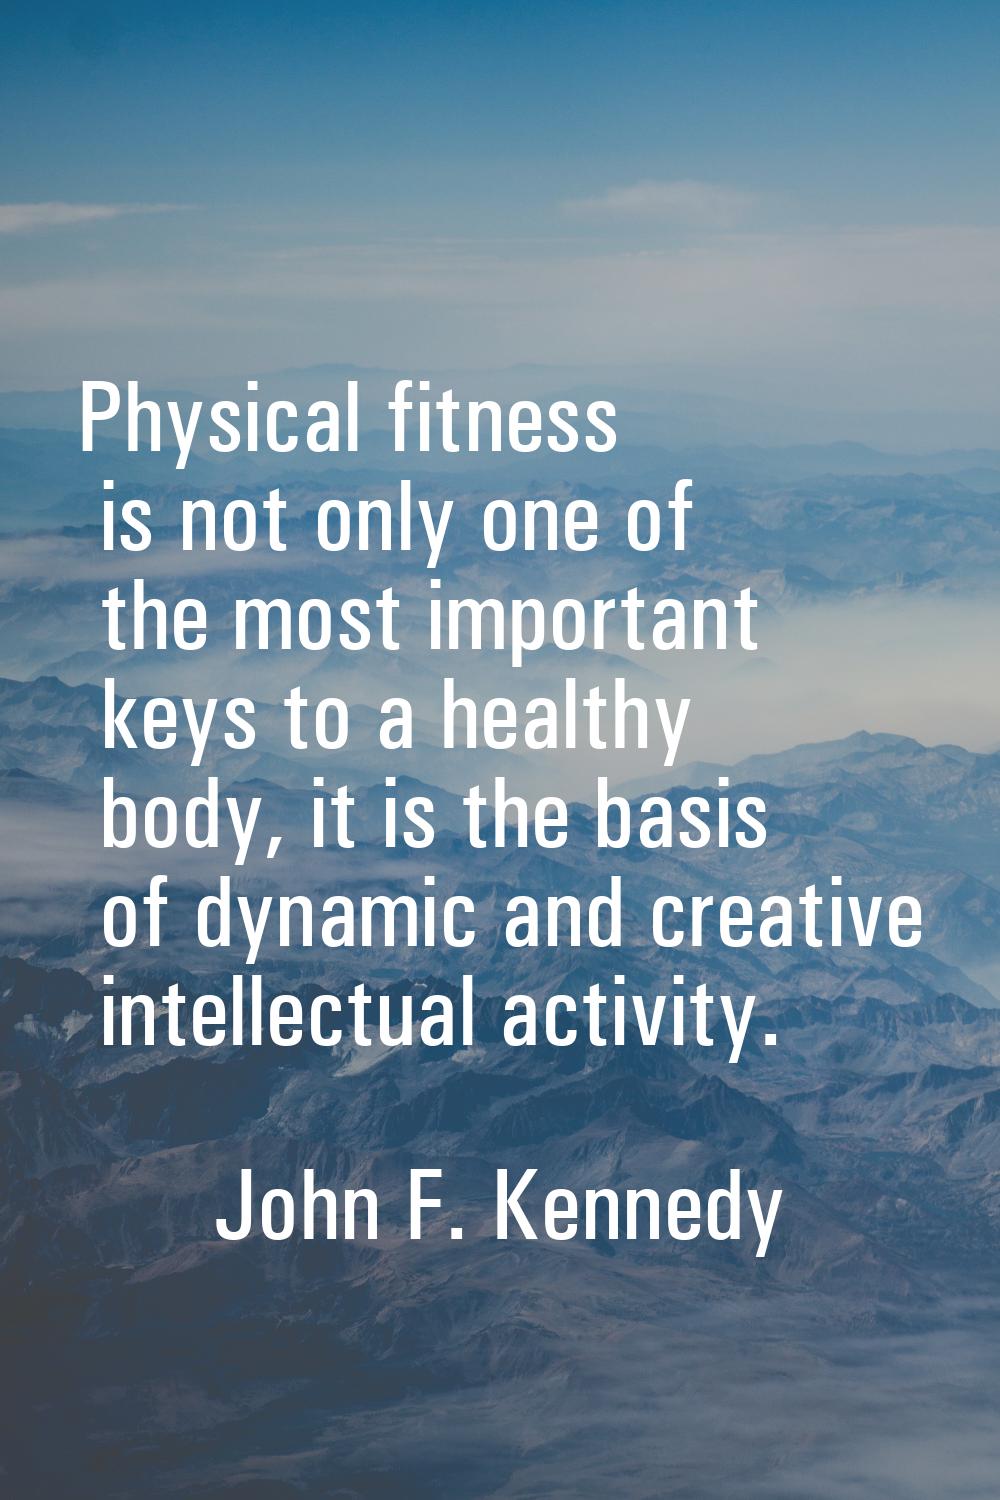 Physical fitness is not only one of the most important keys to a healthy body, it is the basis of d